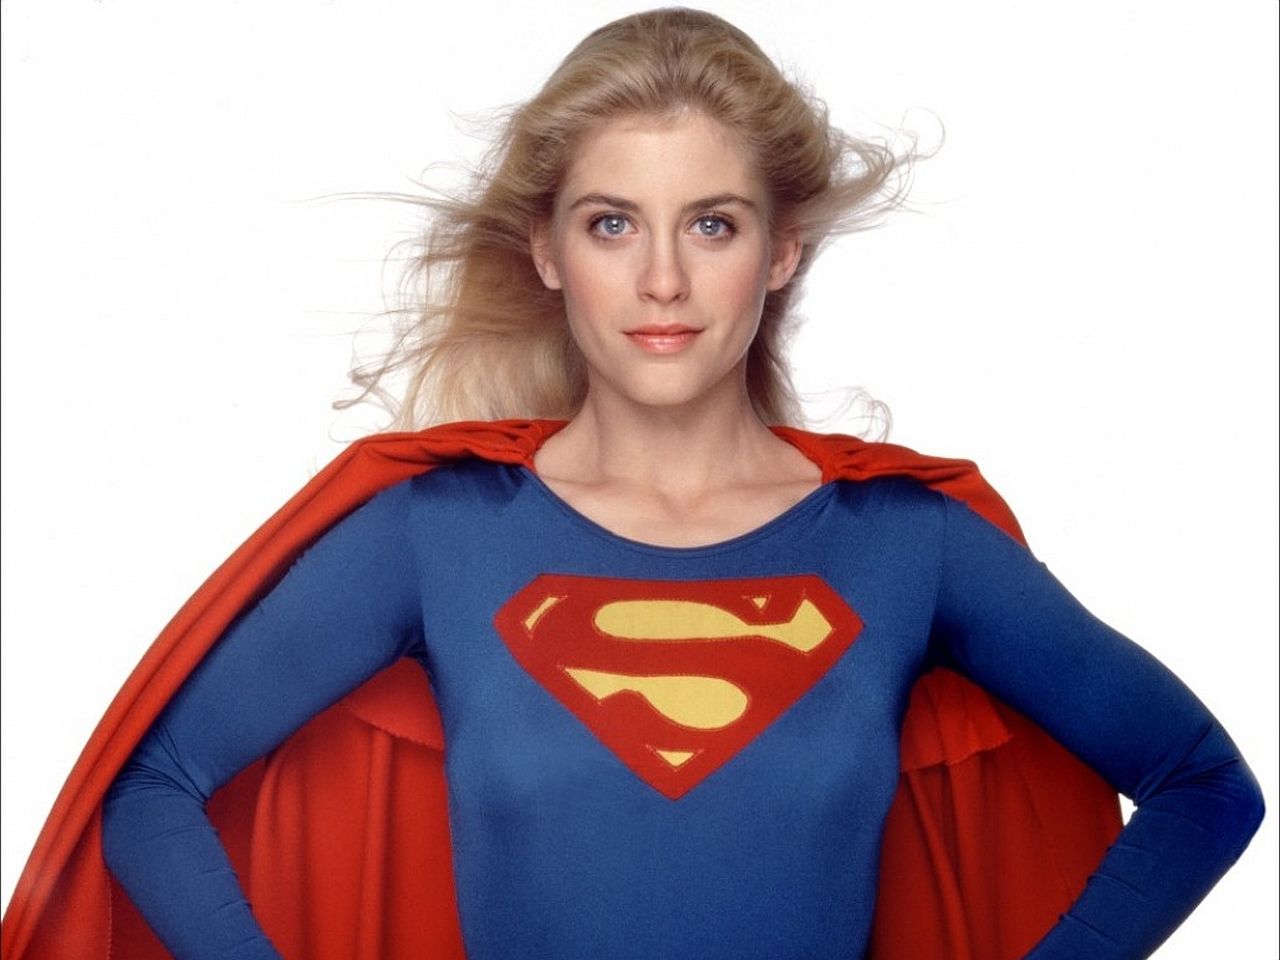 Helen Slater and Dean Cain Join Cast of CBS's Supergirl